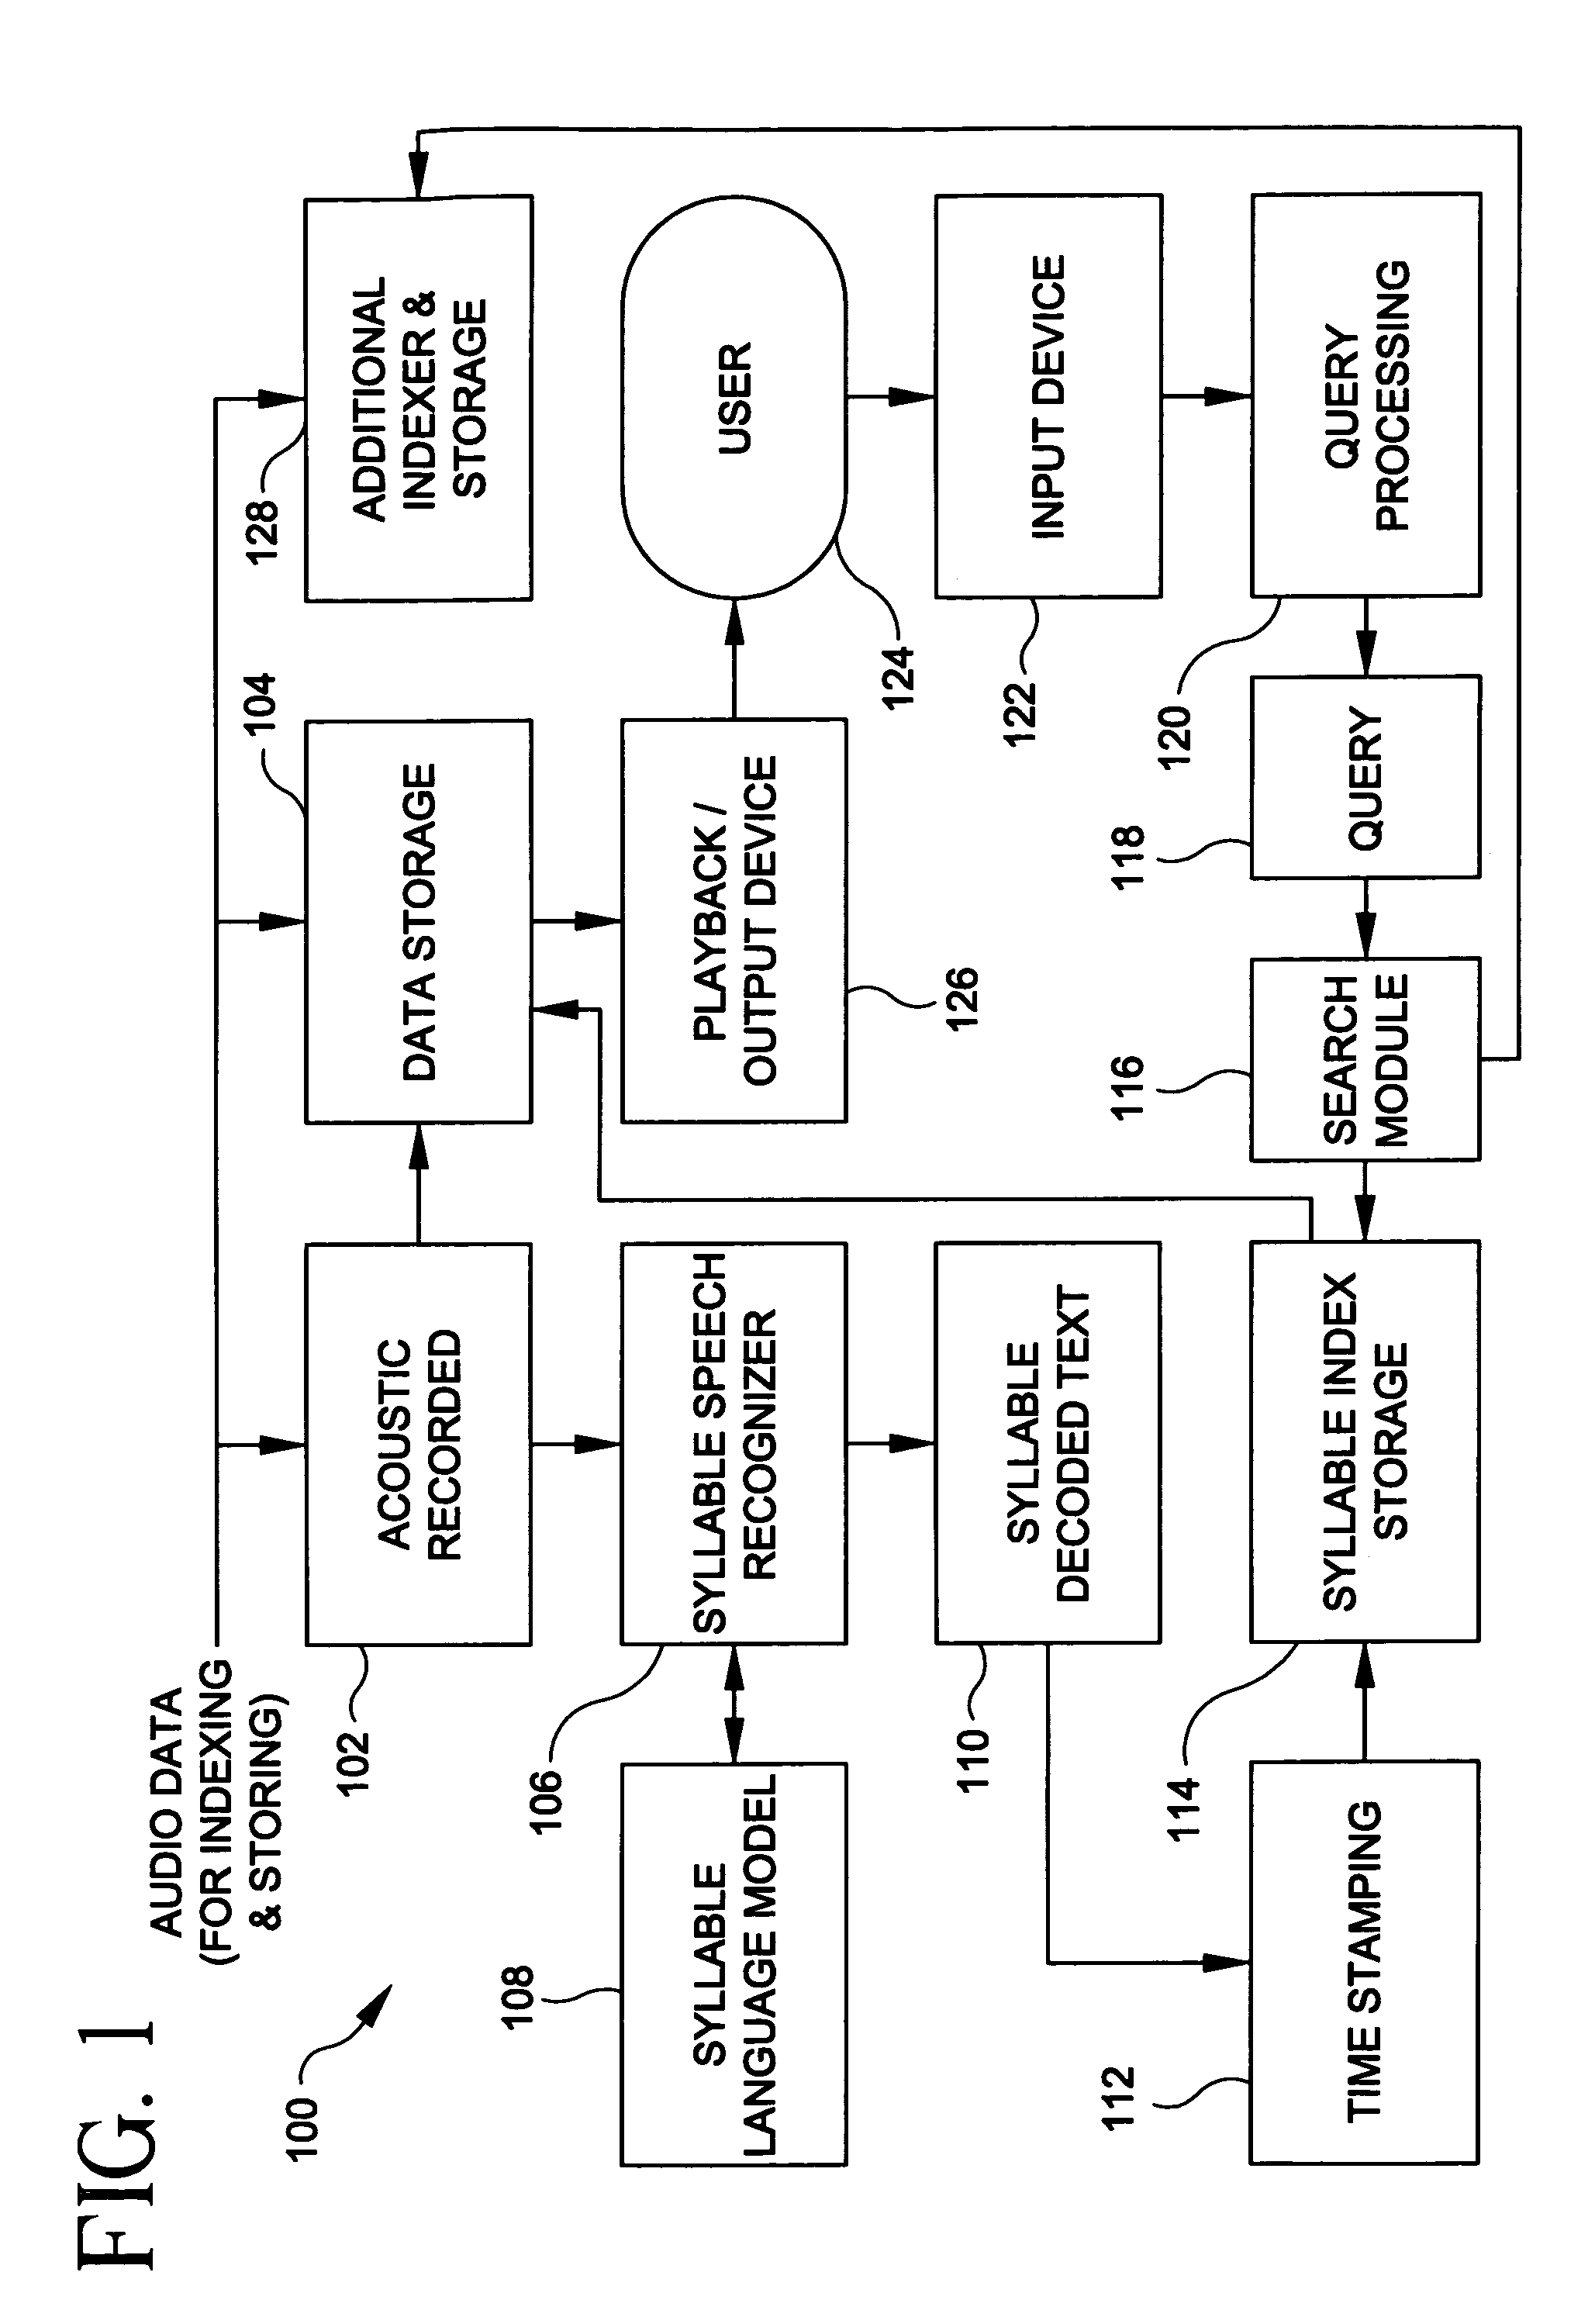 Methods and apparatus for semantic unit based automatic indexing and searching in data archive systems